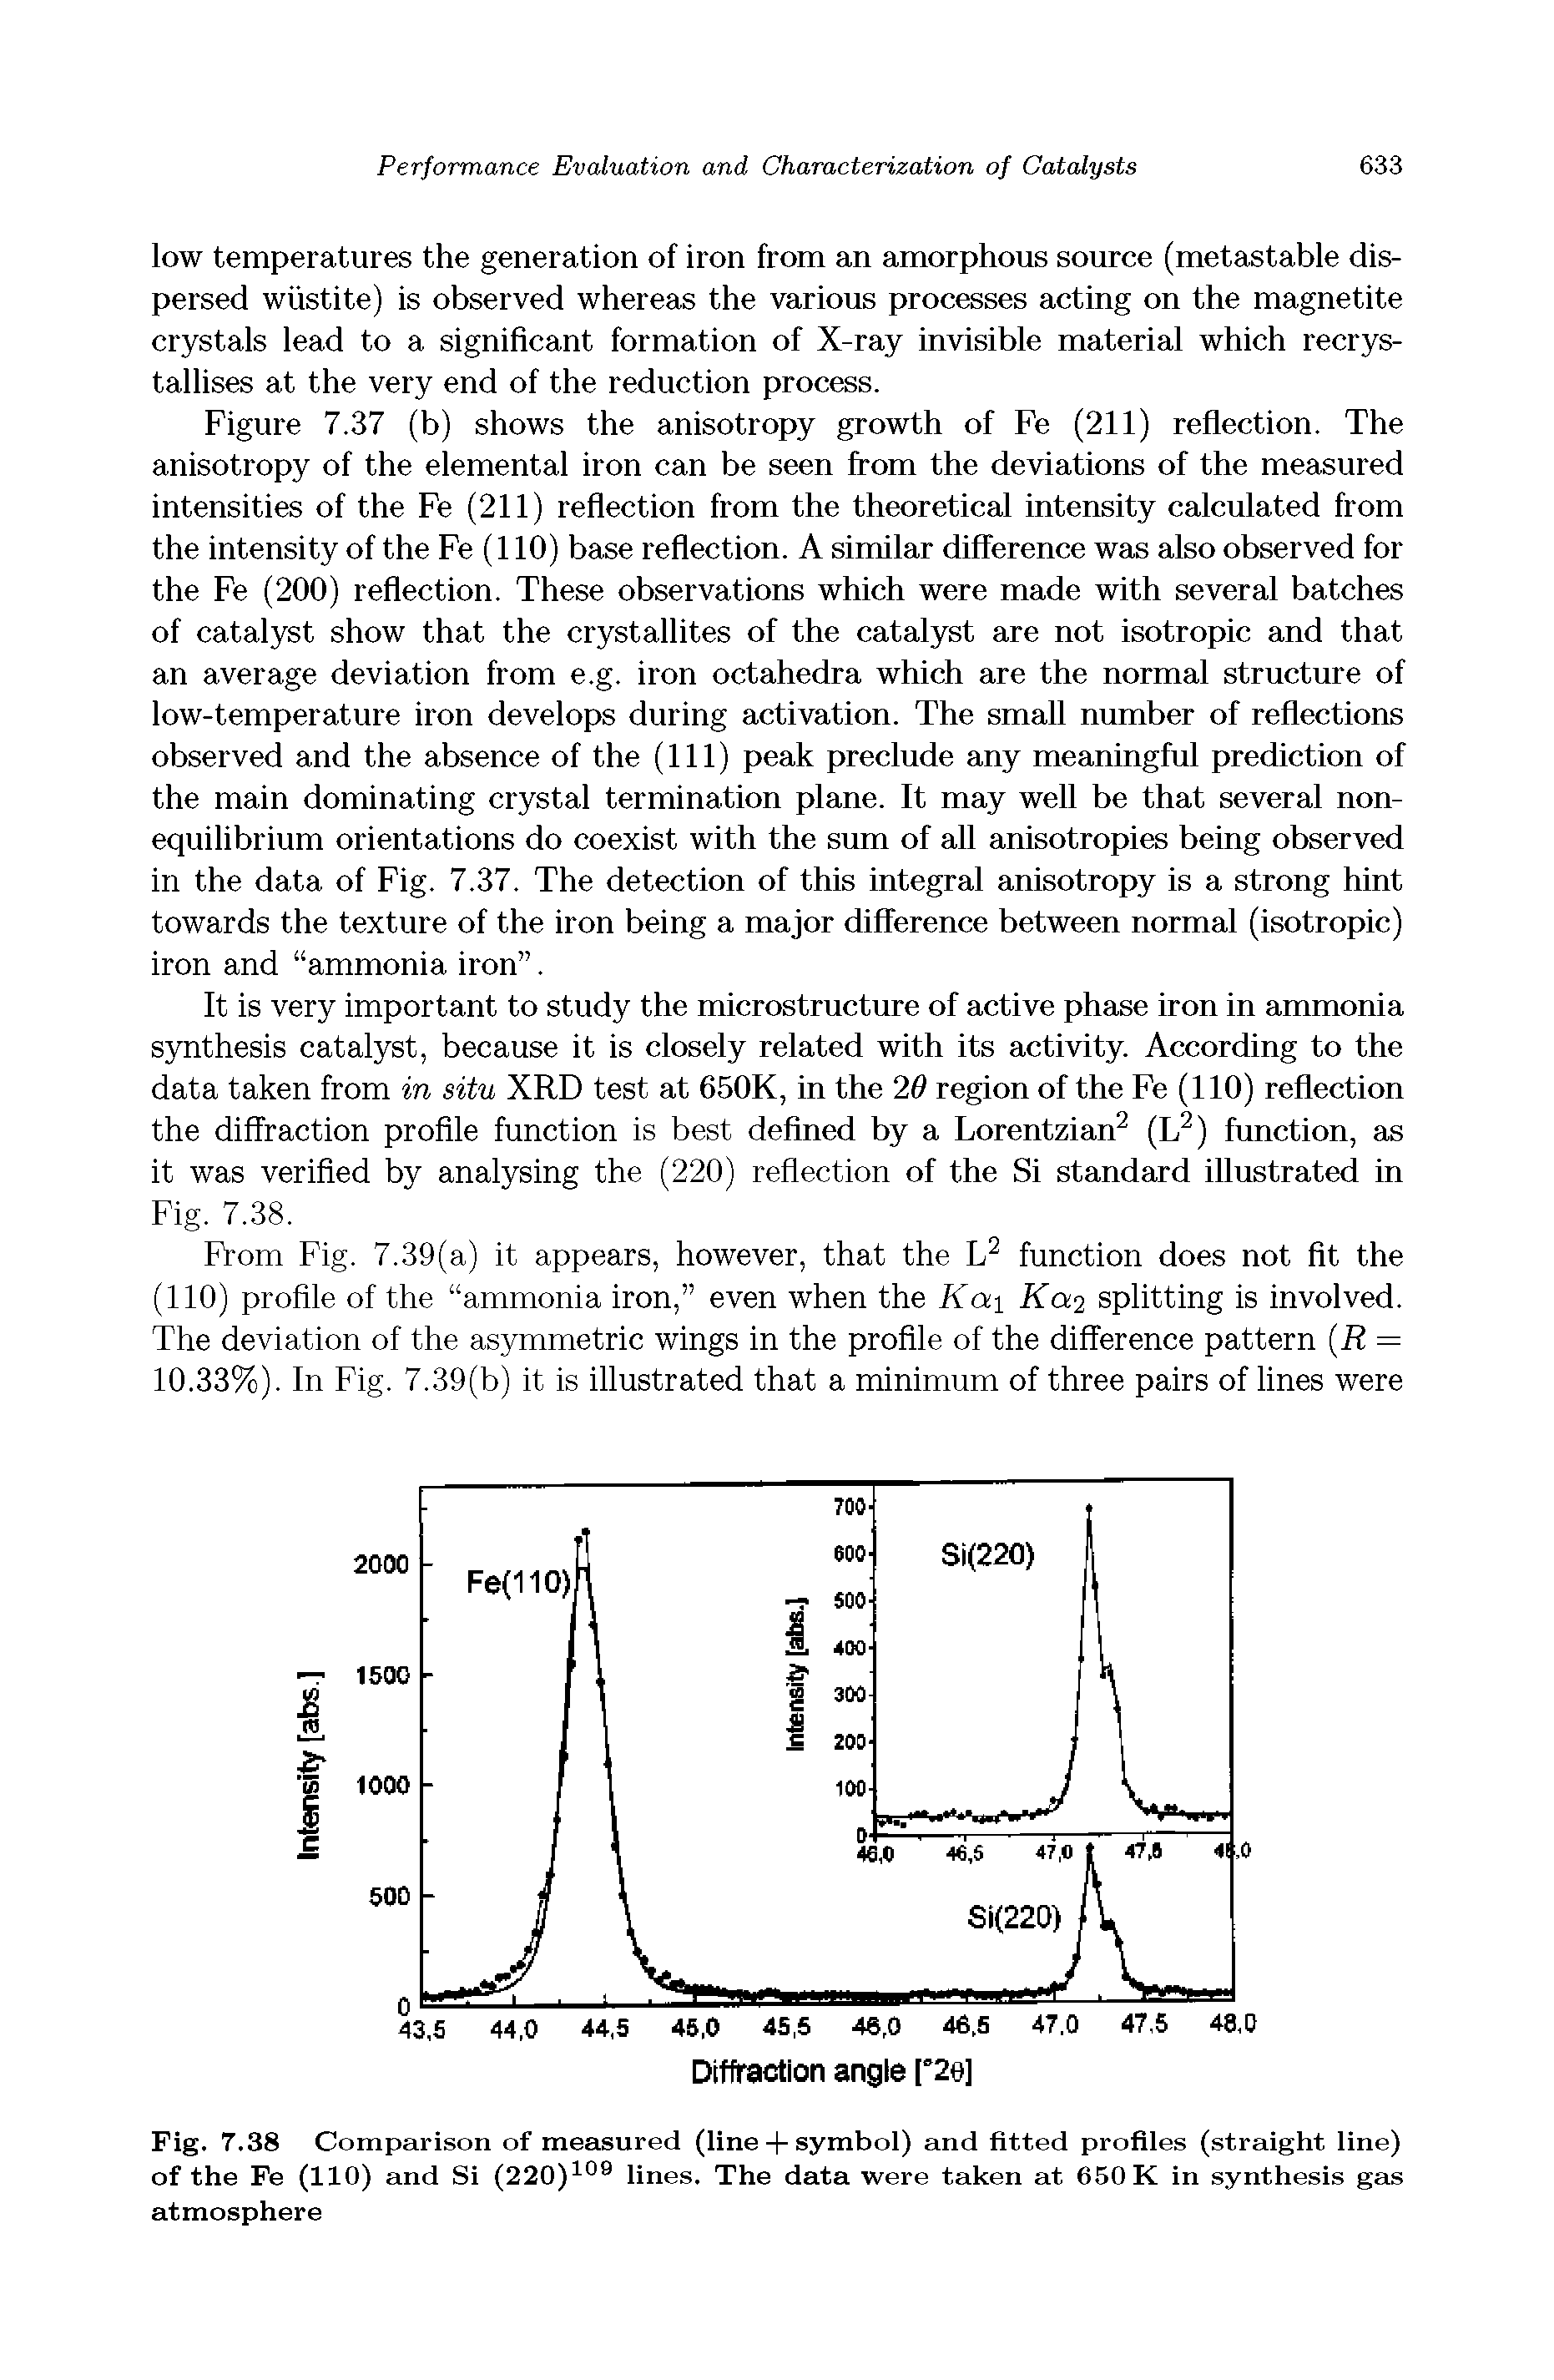 Figure 7.37 (b) shows the anisotropy growth of Fe (211) reflection. The anisotropy of the elemental iron can be seen from the deviations of the measured intensities of the Fe (211) reflection from the theoretical intensity calculated from the intensity of the Fe (110) base reflection. A similar difference was also observed for the Fe (200) reflection. These observations which were made with several batches of catalyst show that the crystallites of the catalyst are not isotropic and that an average deviation from e.g. iron octahedra which are the normal structme of low-temperature iron develops during activation. The small munber of reflections observed and the absence of the (111) peak preclude any meaningful prediction of the main dominating crystal termination plane. It may well be that several nonequilibrium orientations do coexist with the smn of aU anisotropies being observed in the data of Fig. 7.37. The detection of this integral anisotropy is a strong hint towards the texture of the iron being a major difference between normal (isotropic) iron and ammonia iron .